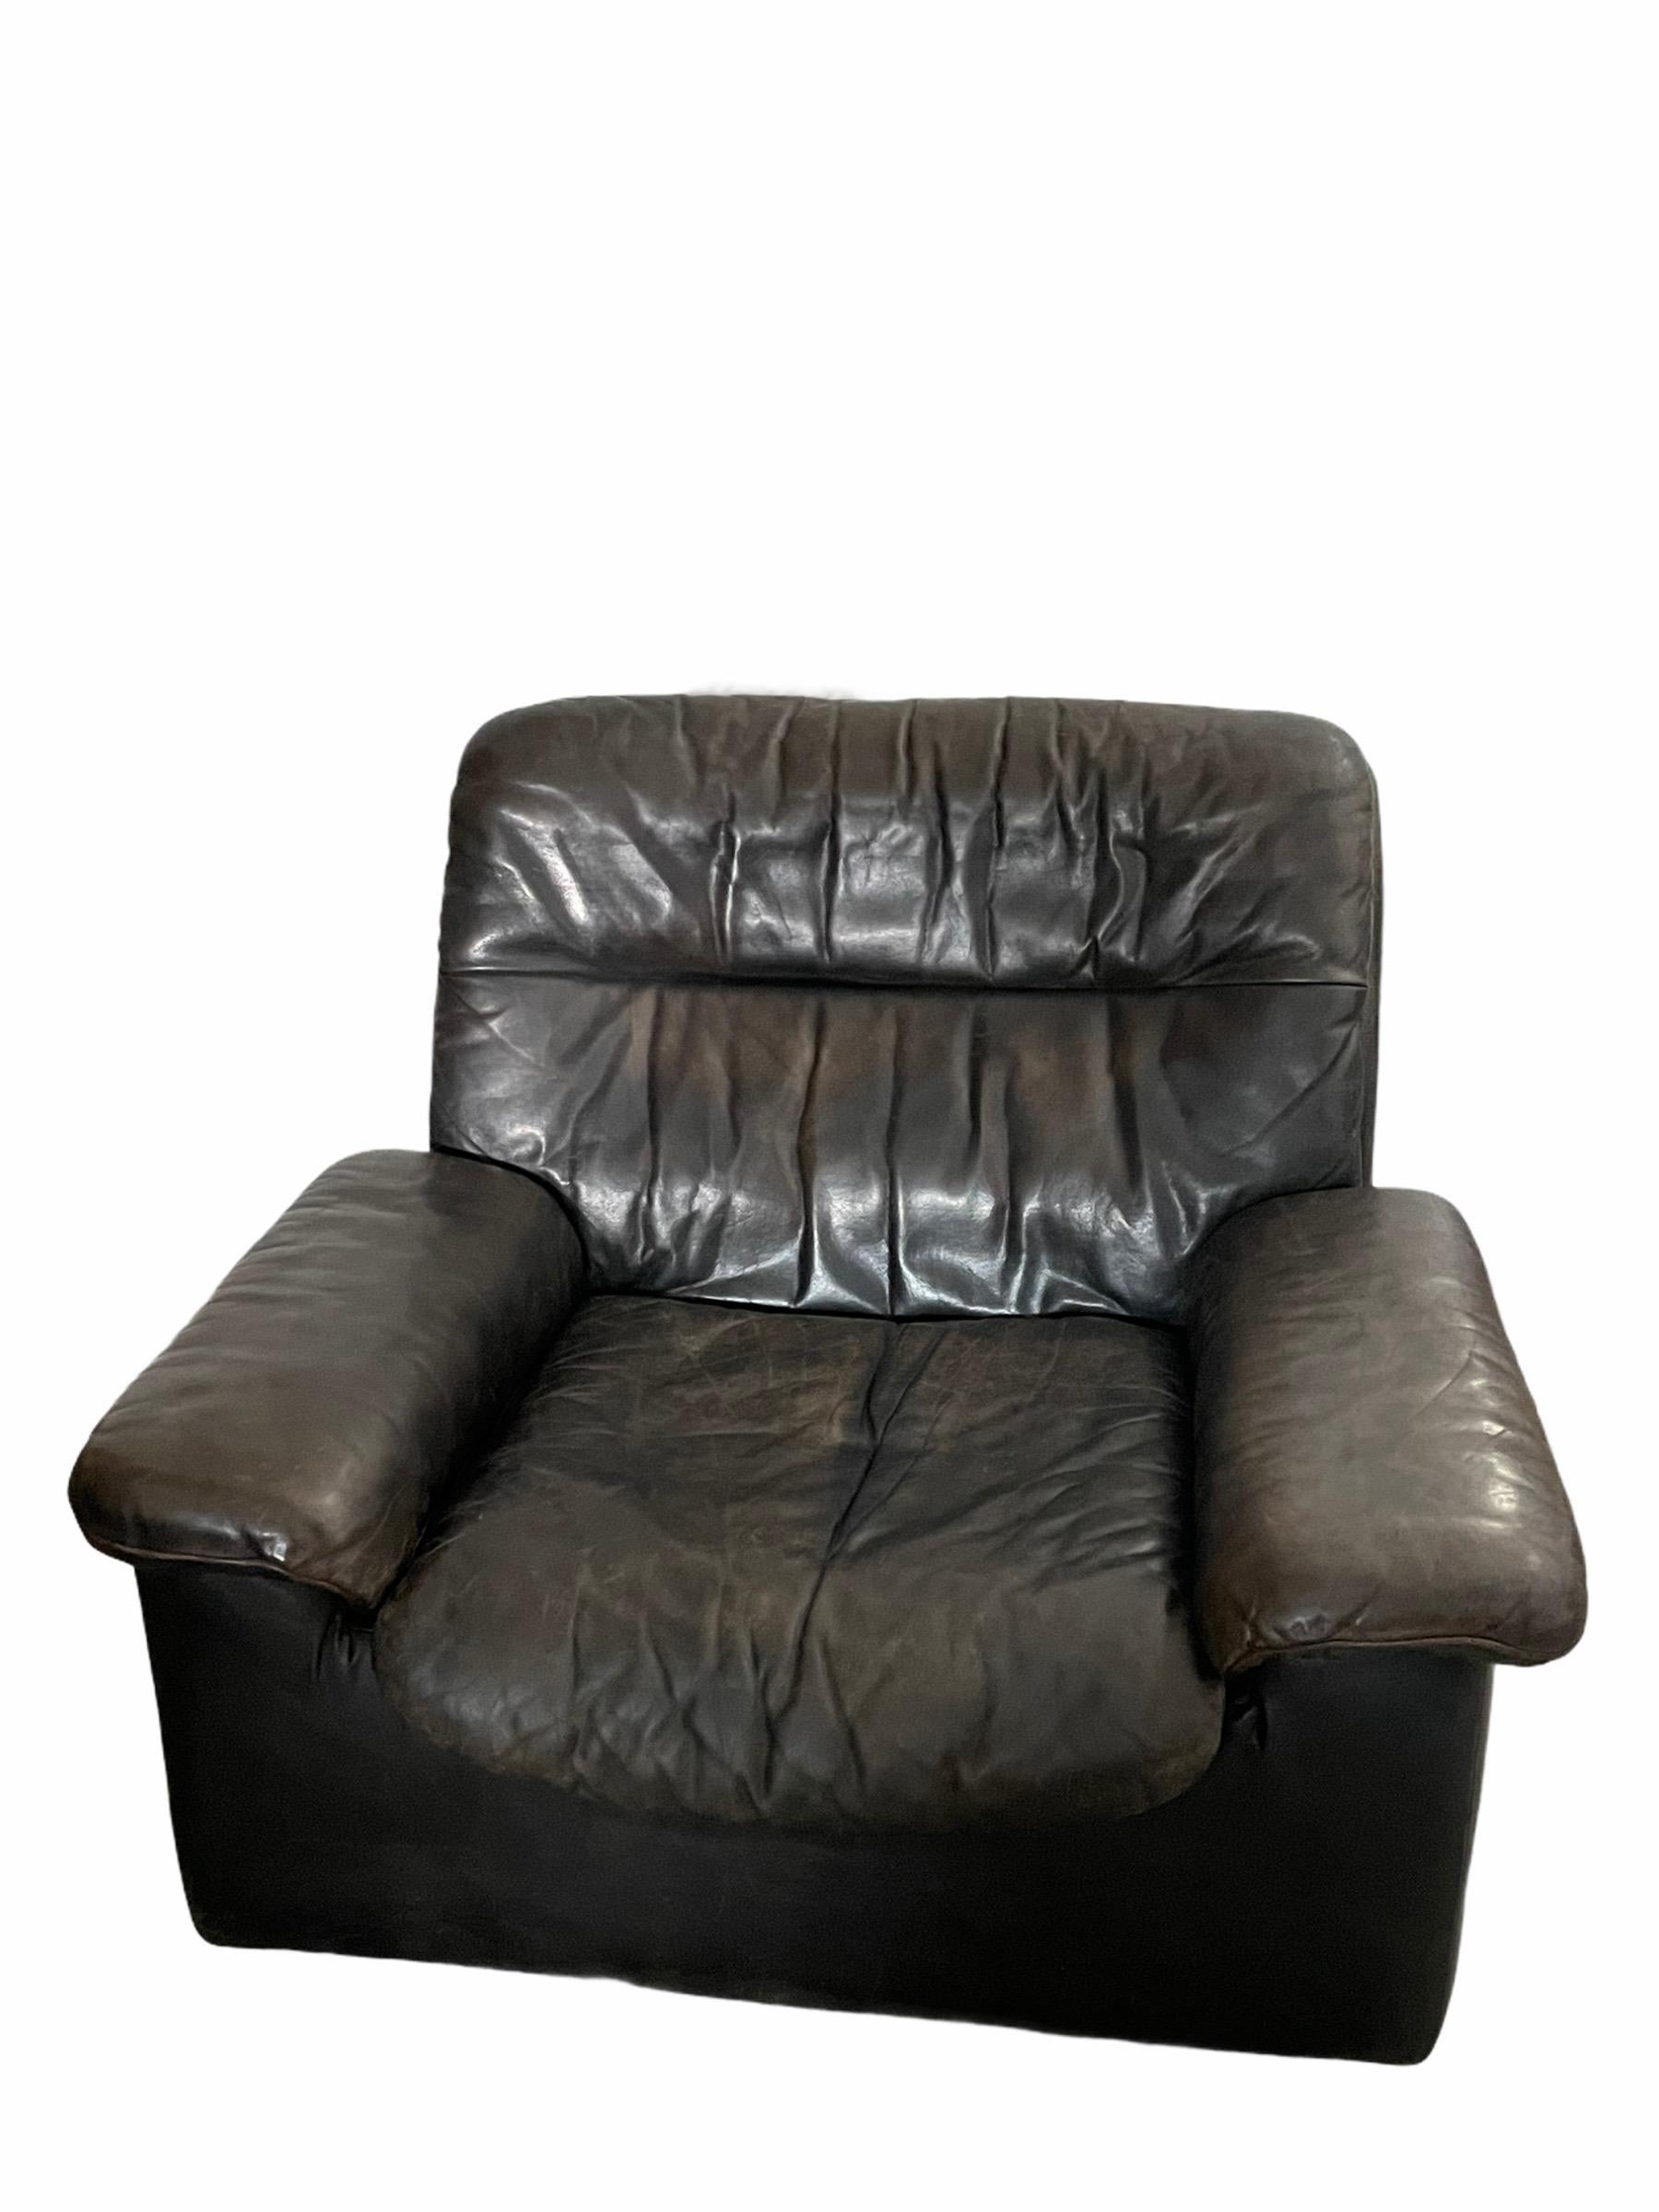 DeSede reclining armchair. Original from the 1970s. 

It was manufactured by the the Swiss company De Sede which is renowned worldwide for its high quality of handmade leather work. 

It is in made with the high end stitching work De Sede is